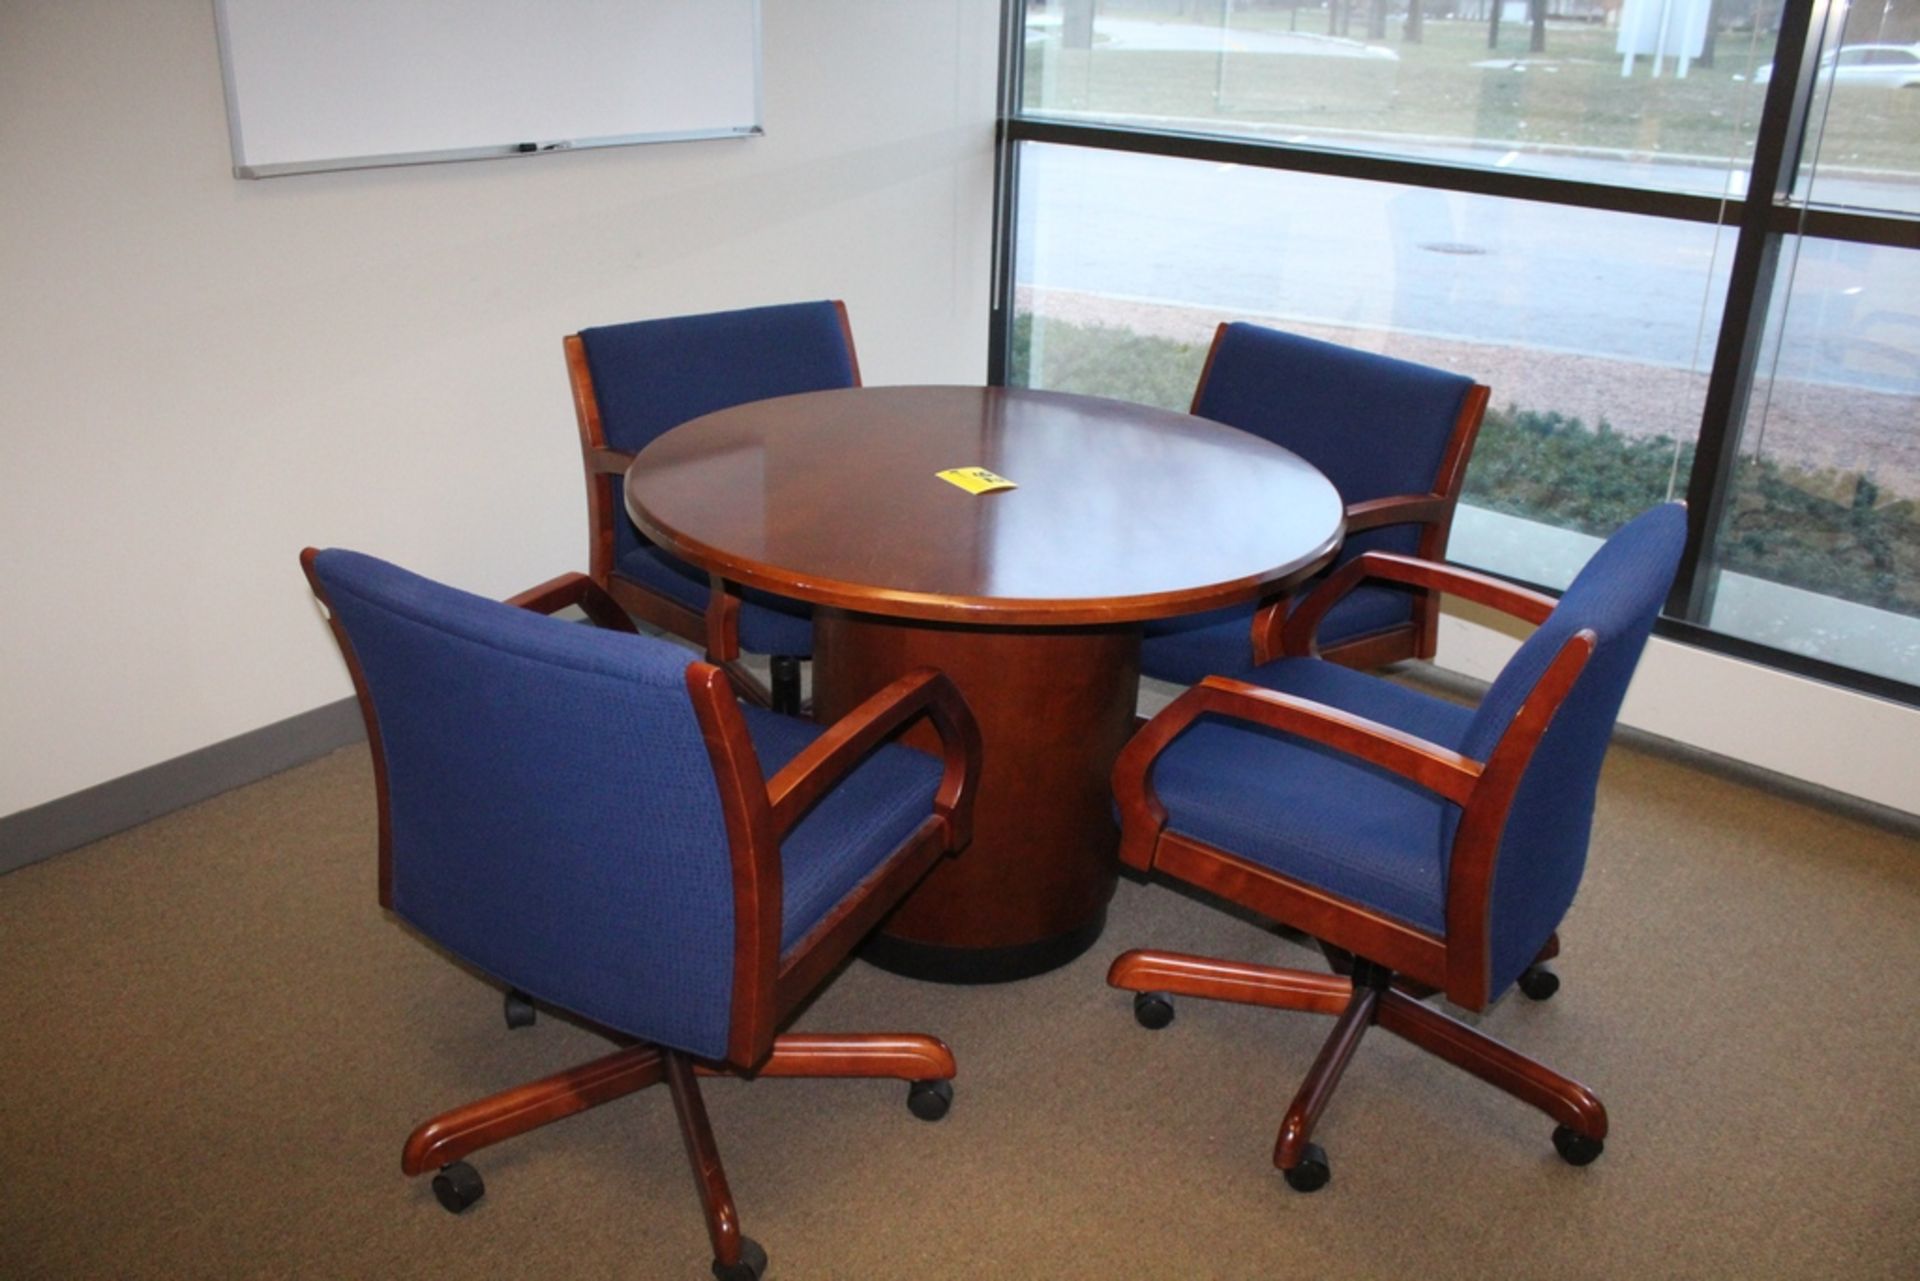 ROUND TABLE, WITH FOUR PORTABLE CHAIRS 42"